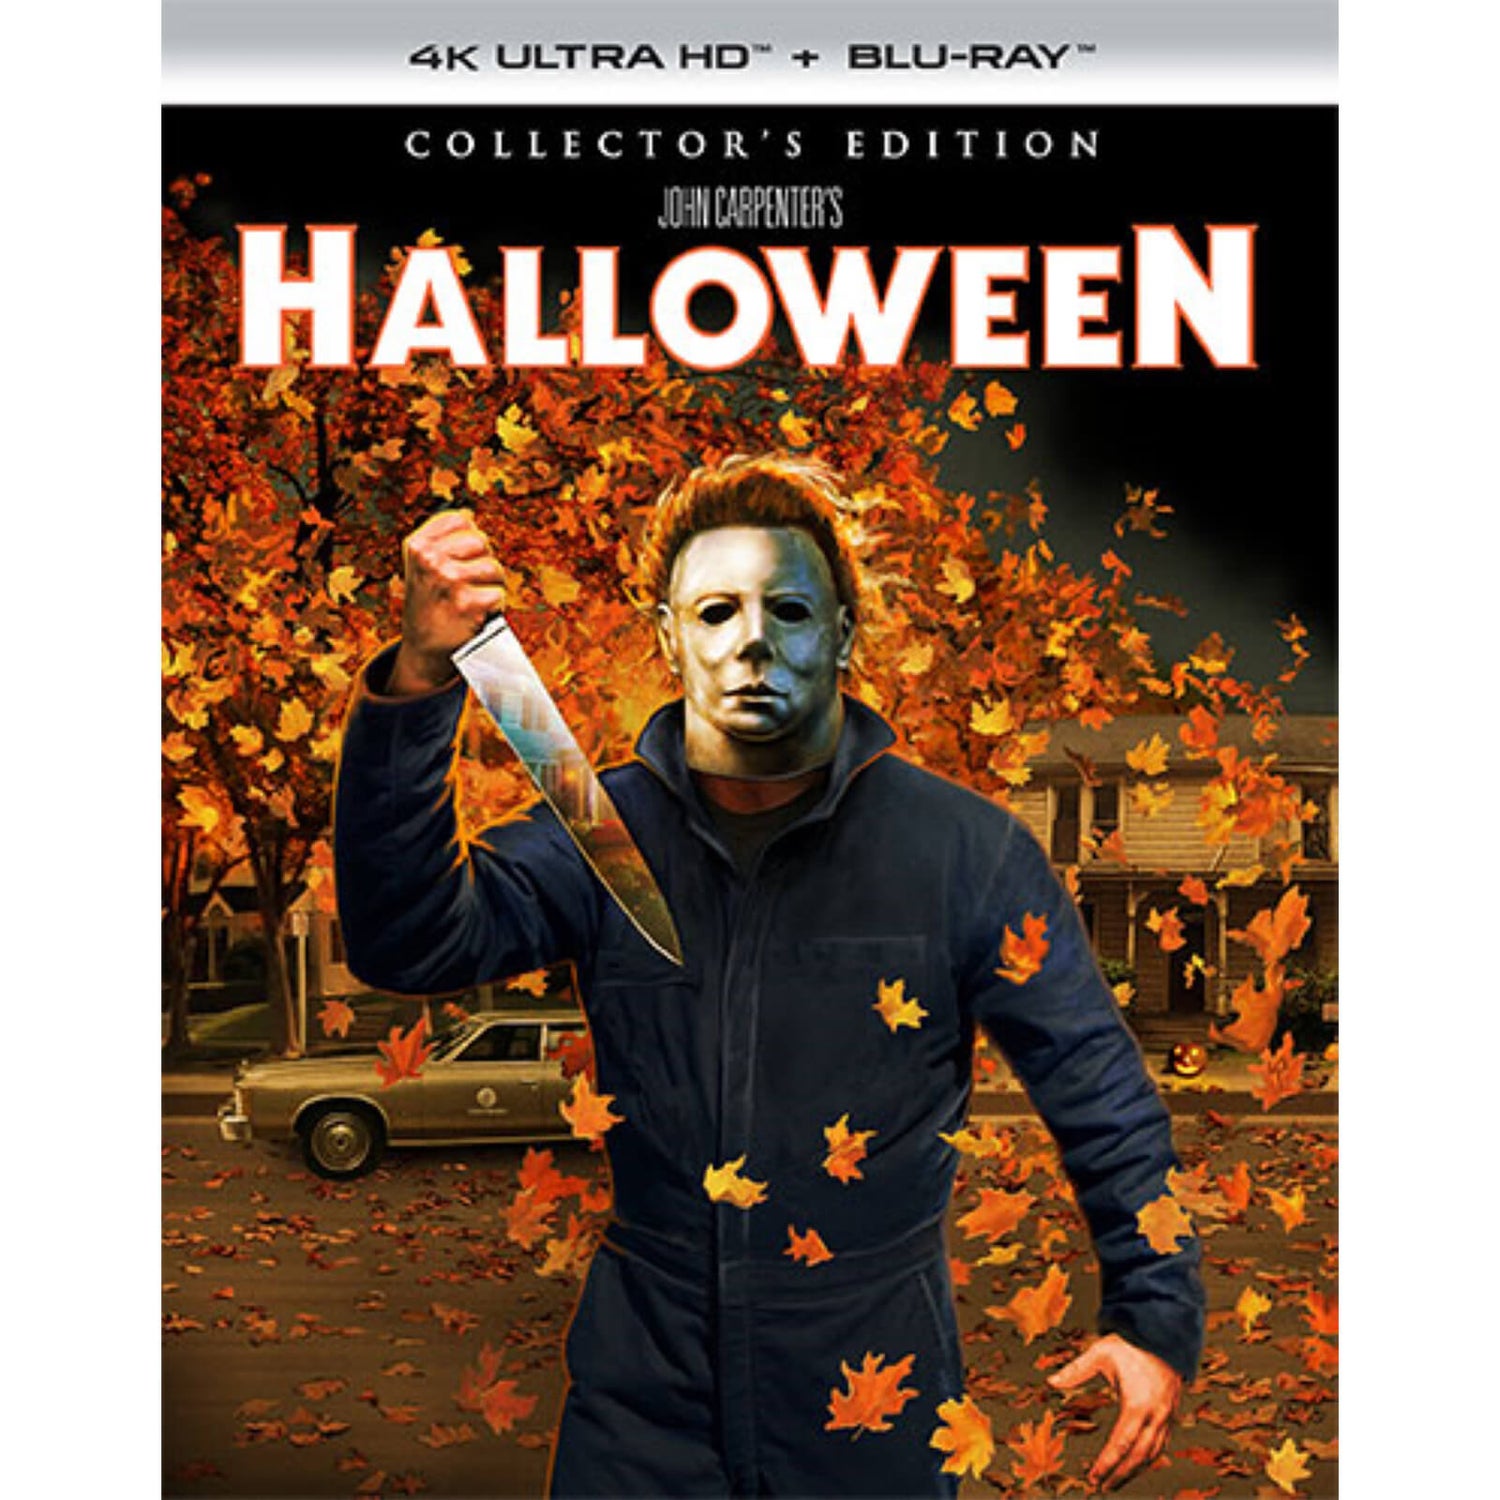 Halloween - 4K Ultra HD Collector's Edition (Includes Blu-ray) (US Import)